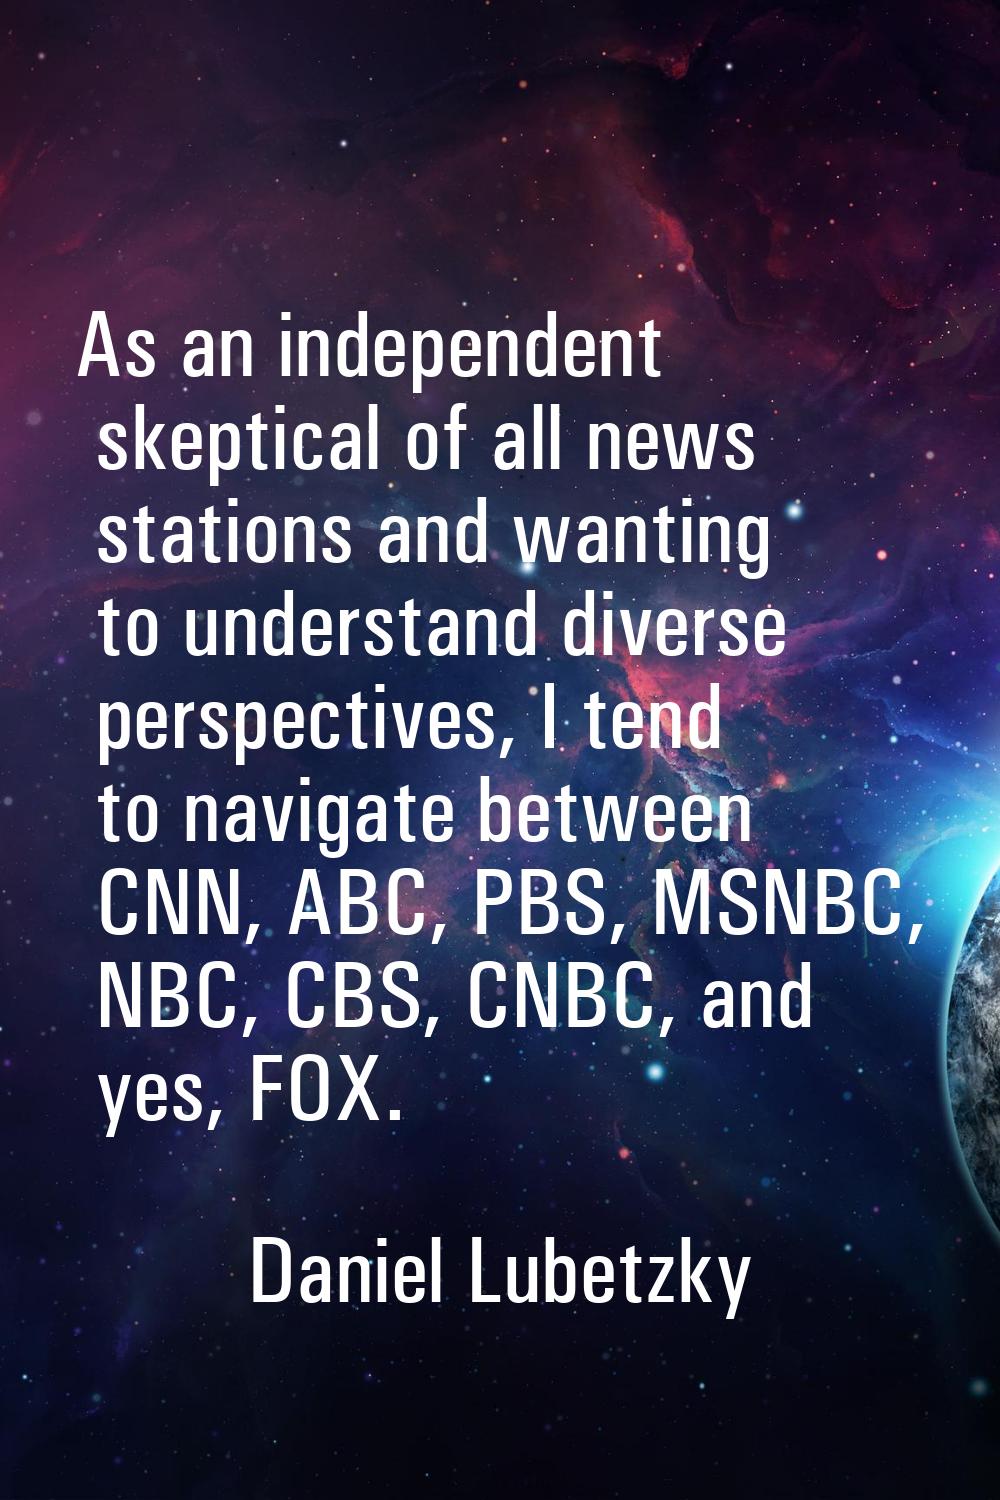 As an independent skeptical of all news stations and wanting to understand diverse perspectives, I 